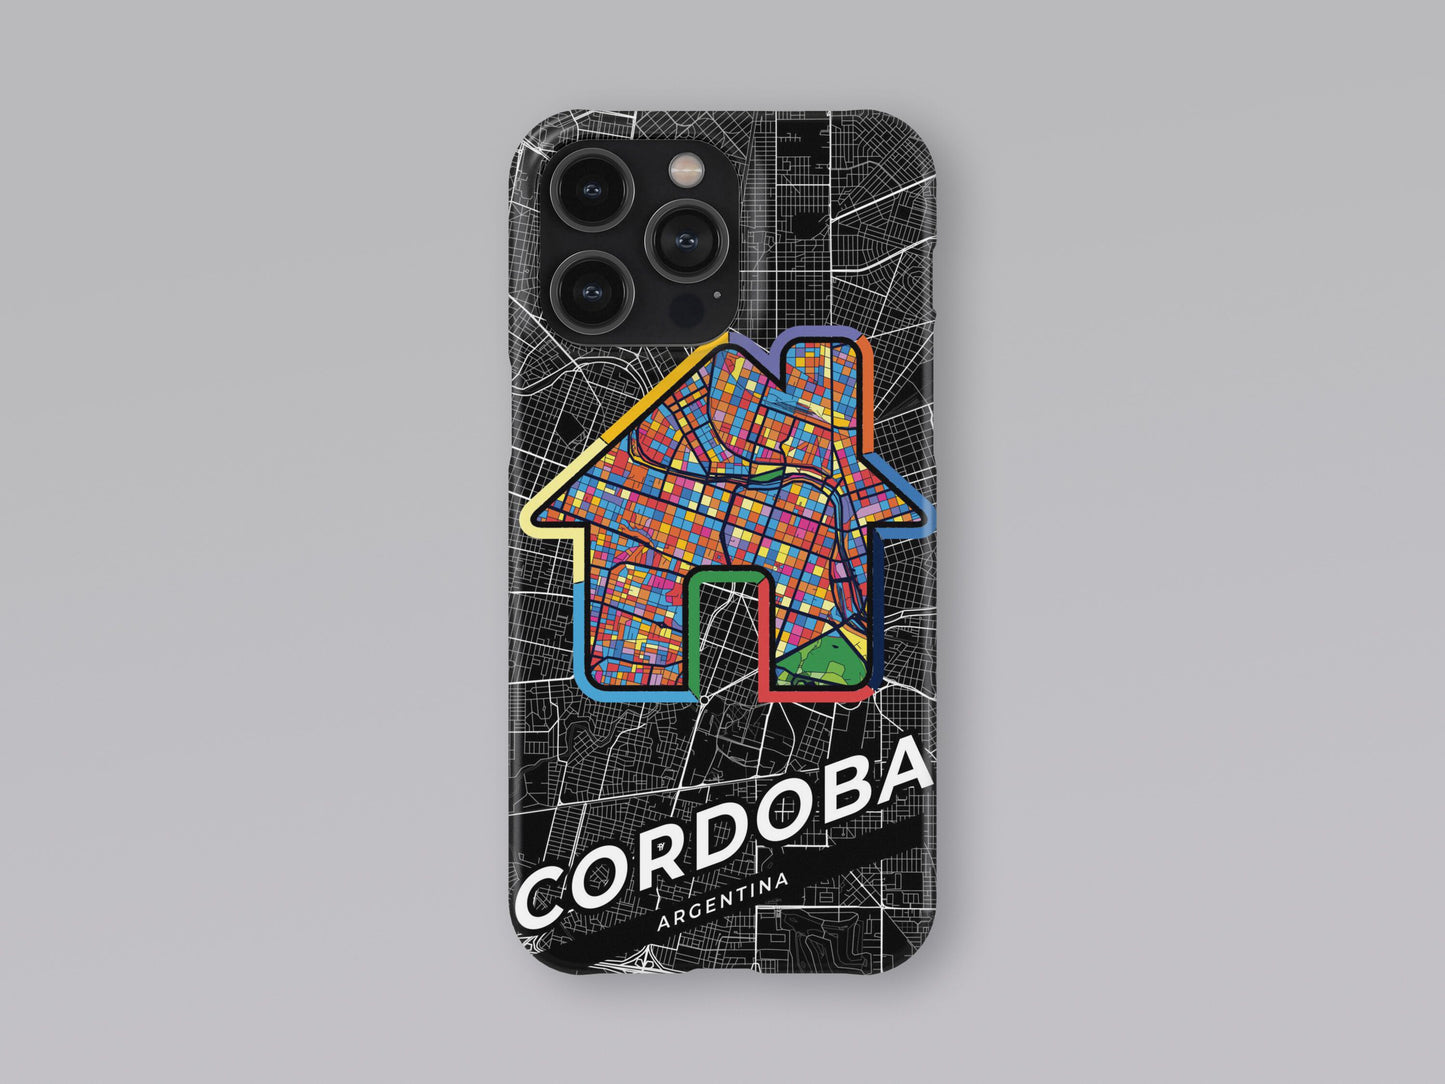 Cordoba Argentina slim phone case with colorful icon. Birthday, wedding or housewarming gift. Couple match cases. 3